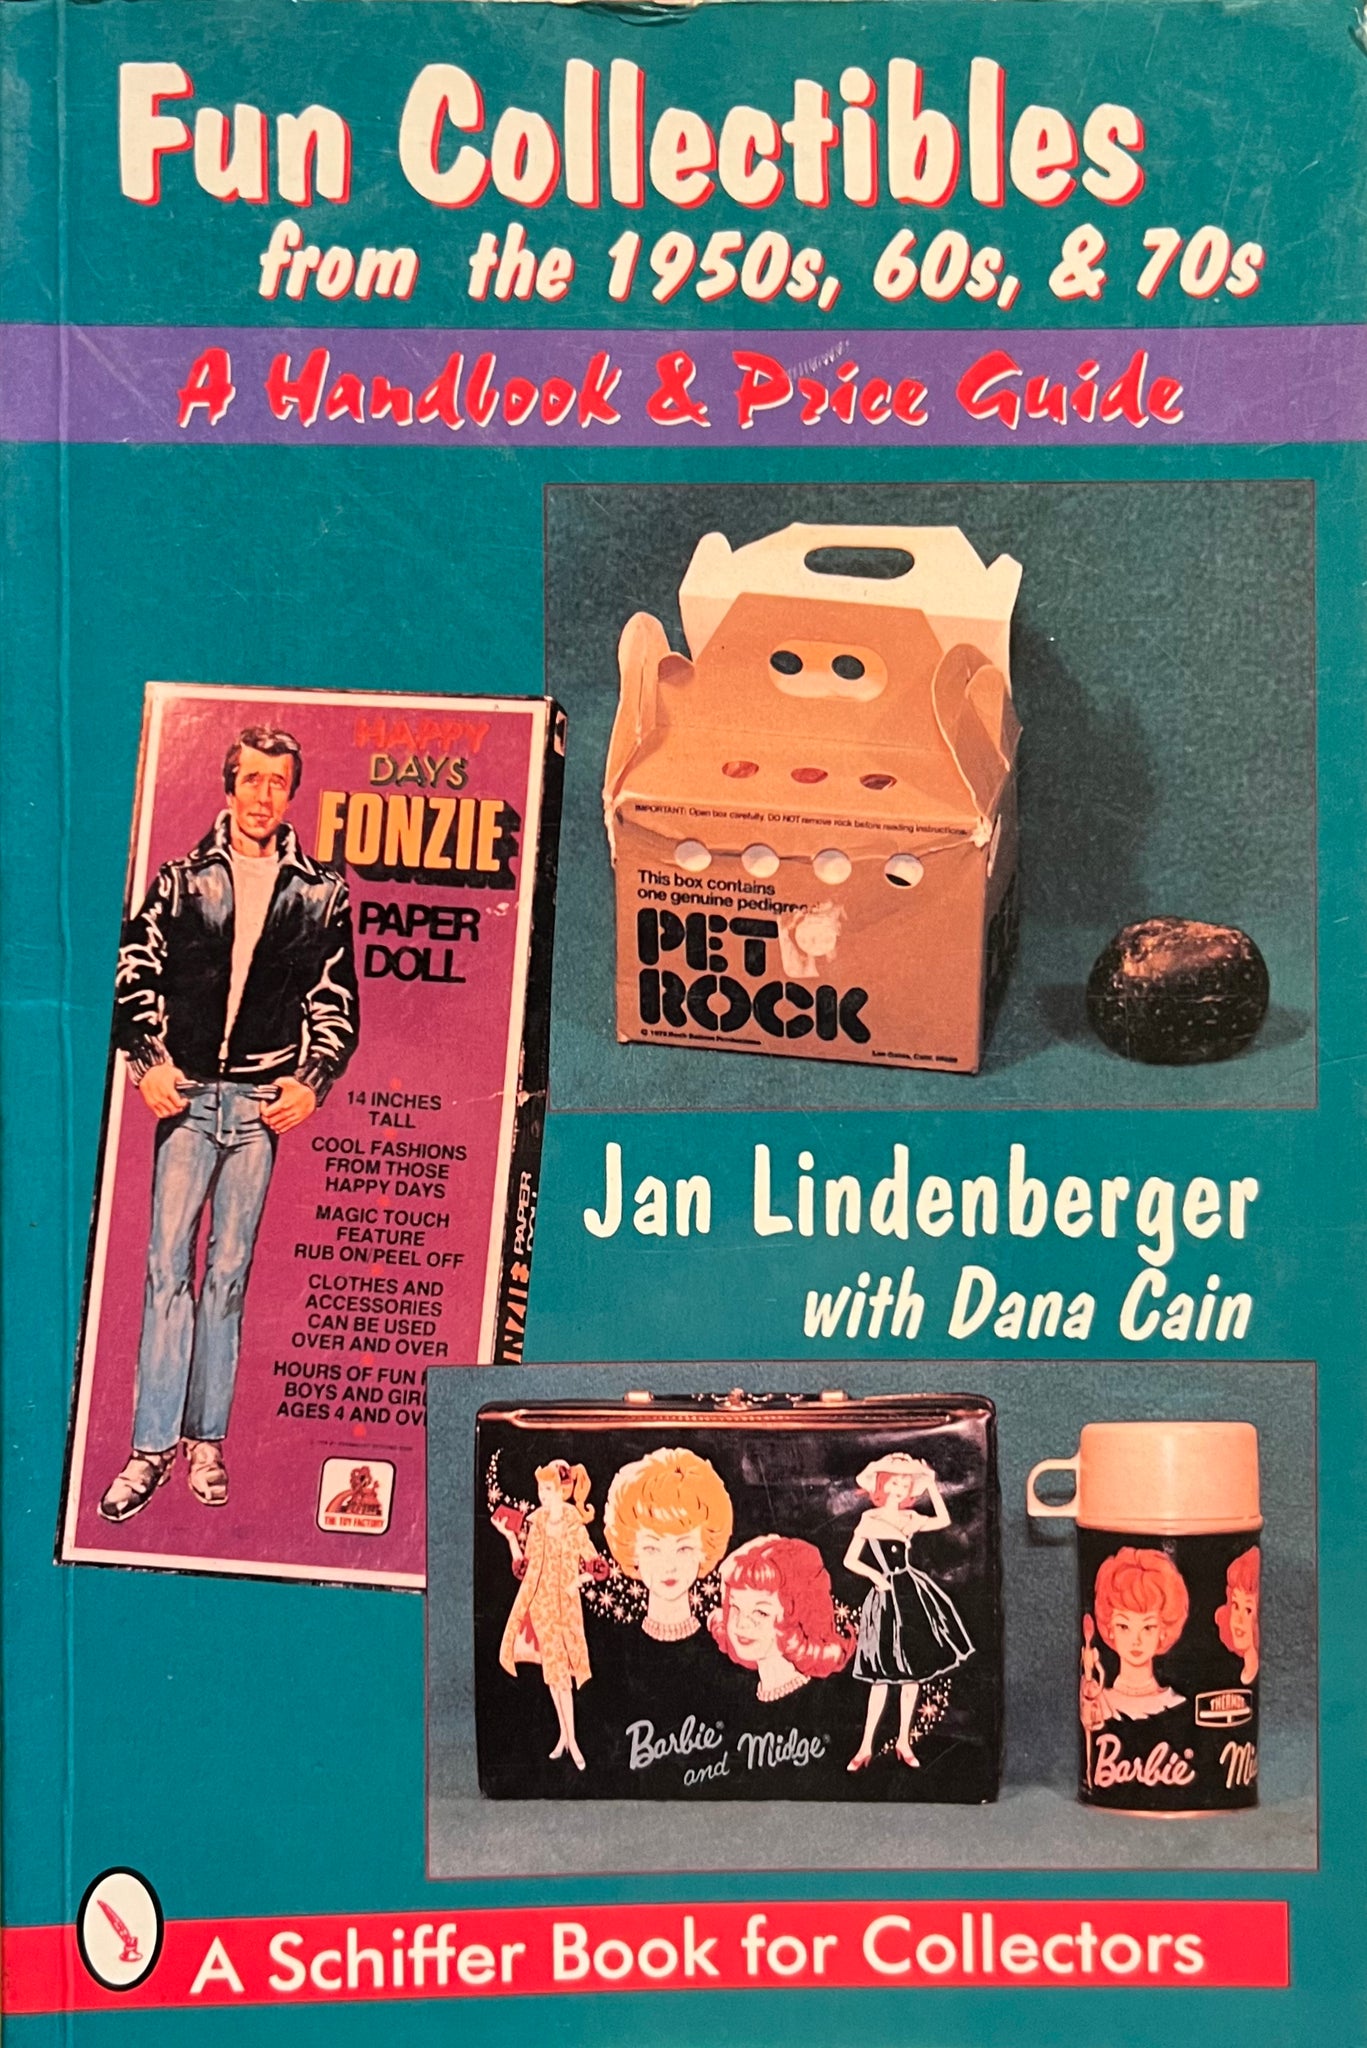 Fun Collectibles from the 1950s, 60s, and 70s: A Handbook and Price Guide, Jan Lindenberger with Dana Cain